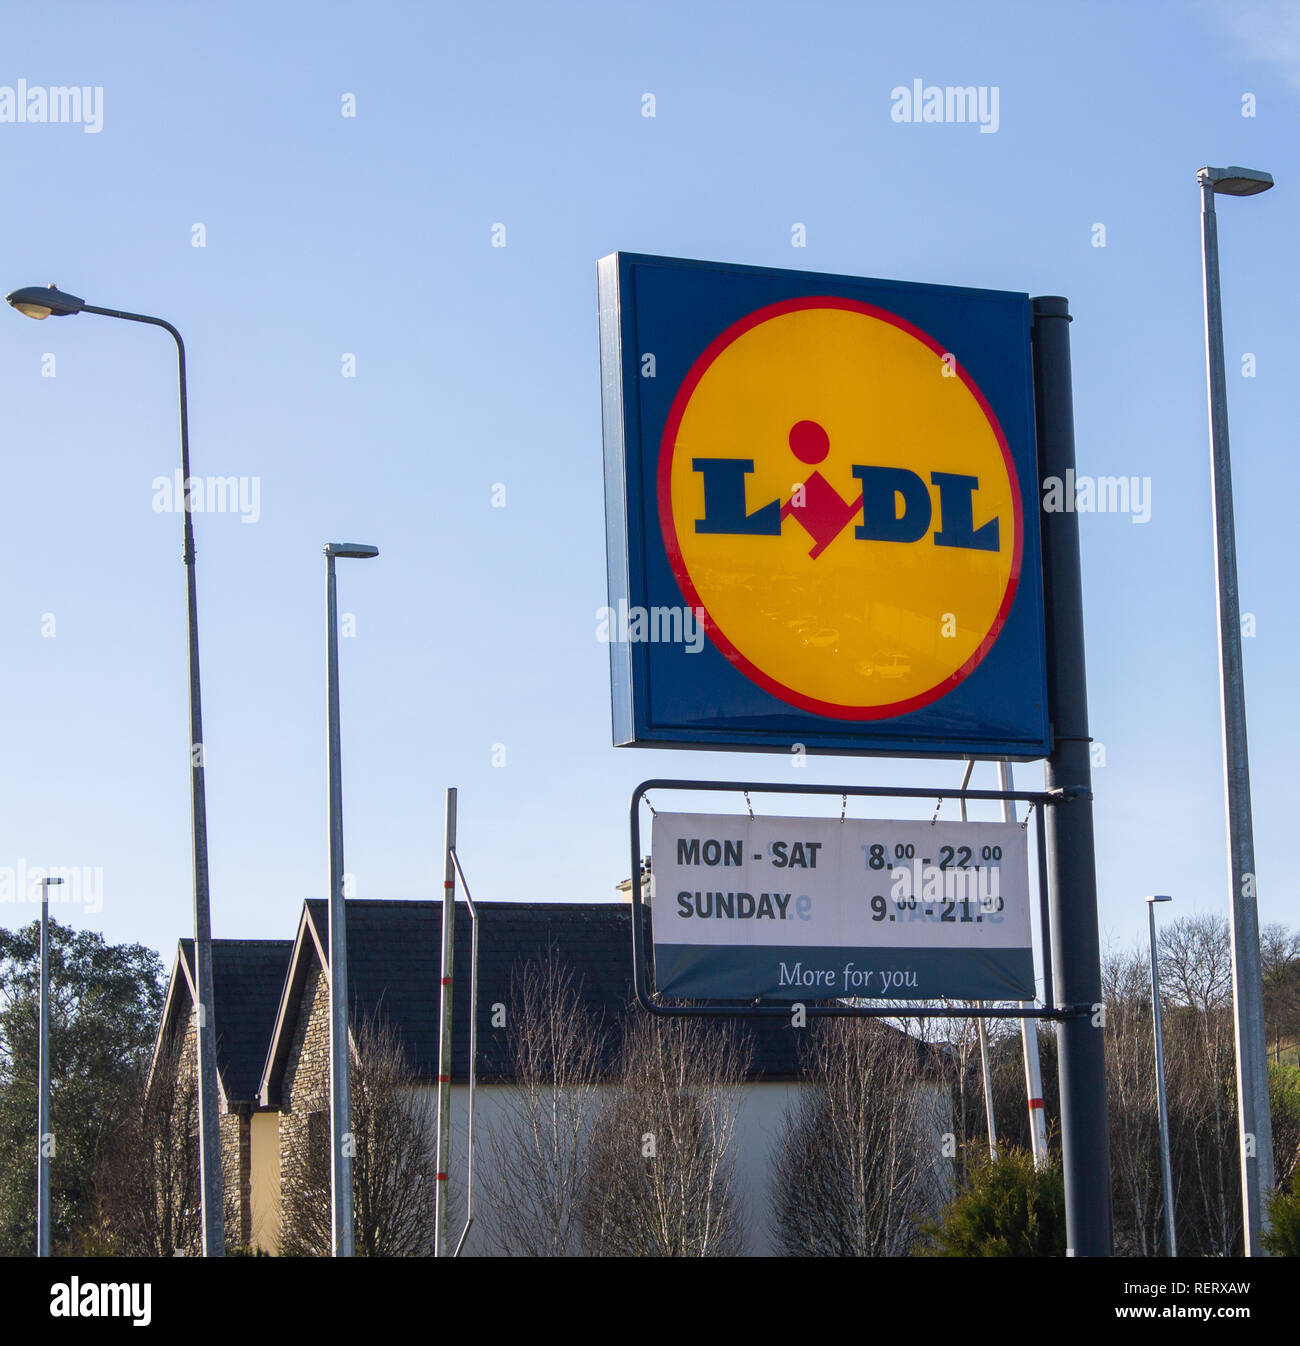 lidl supermarket sign with opening hours Stock Photo